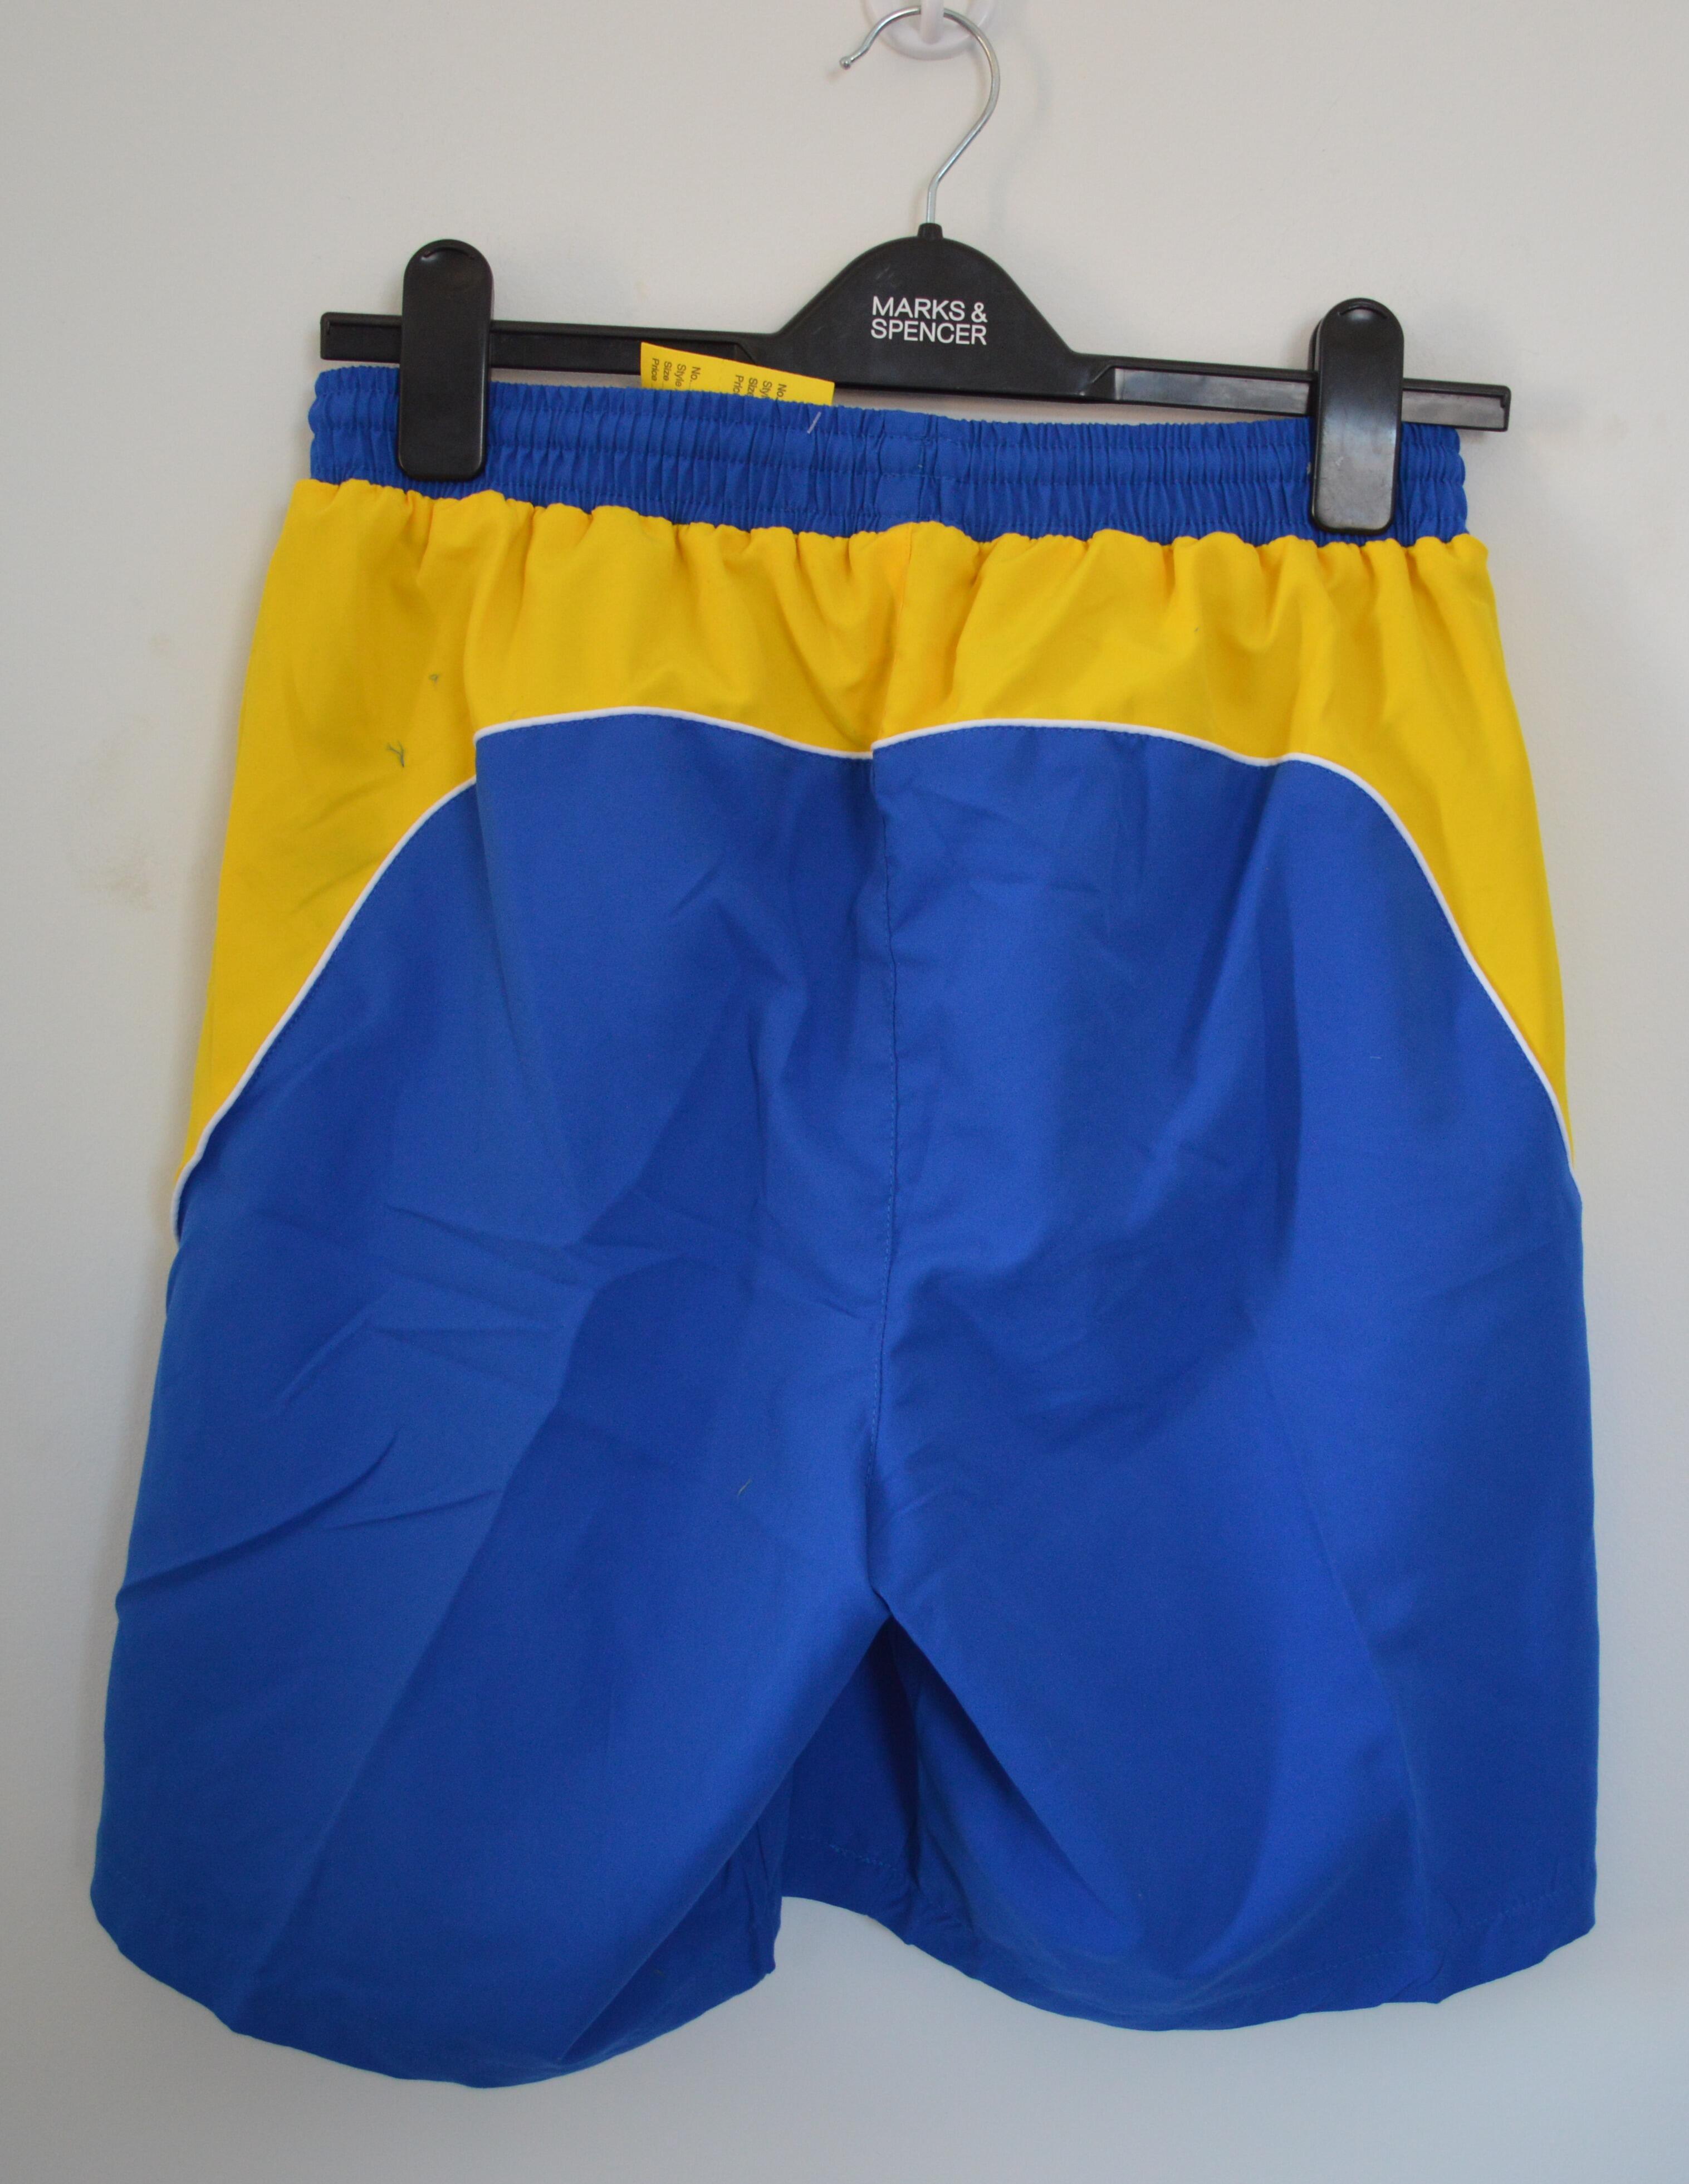 LSR38751 BNWOT Blue and Yellow Gym Shorts with Zipped Pockets - Medium